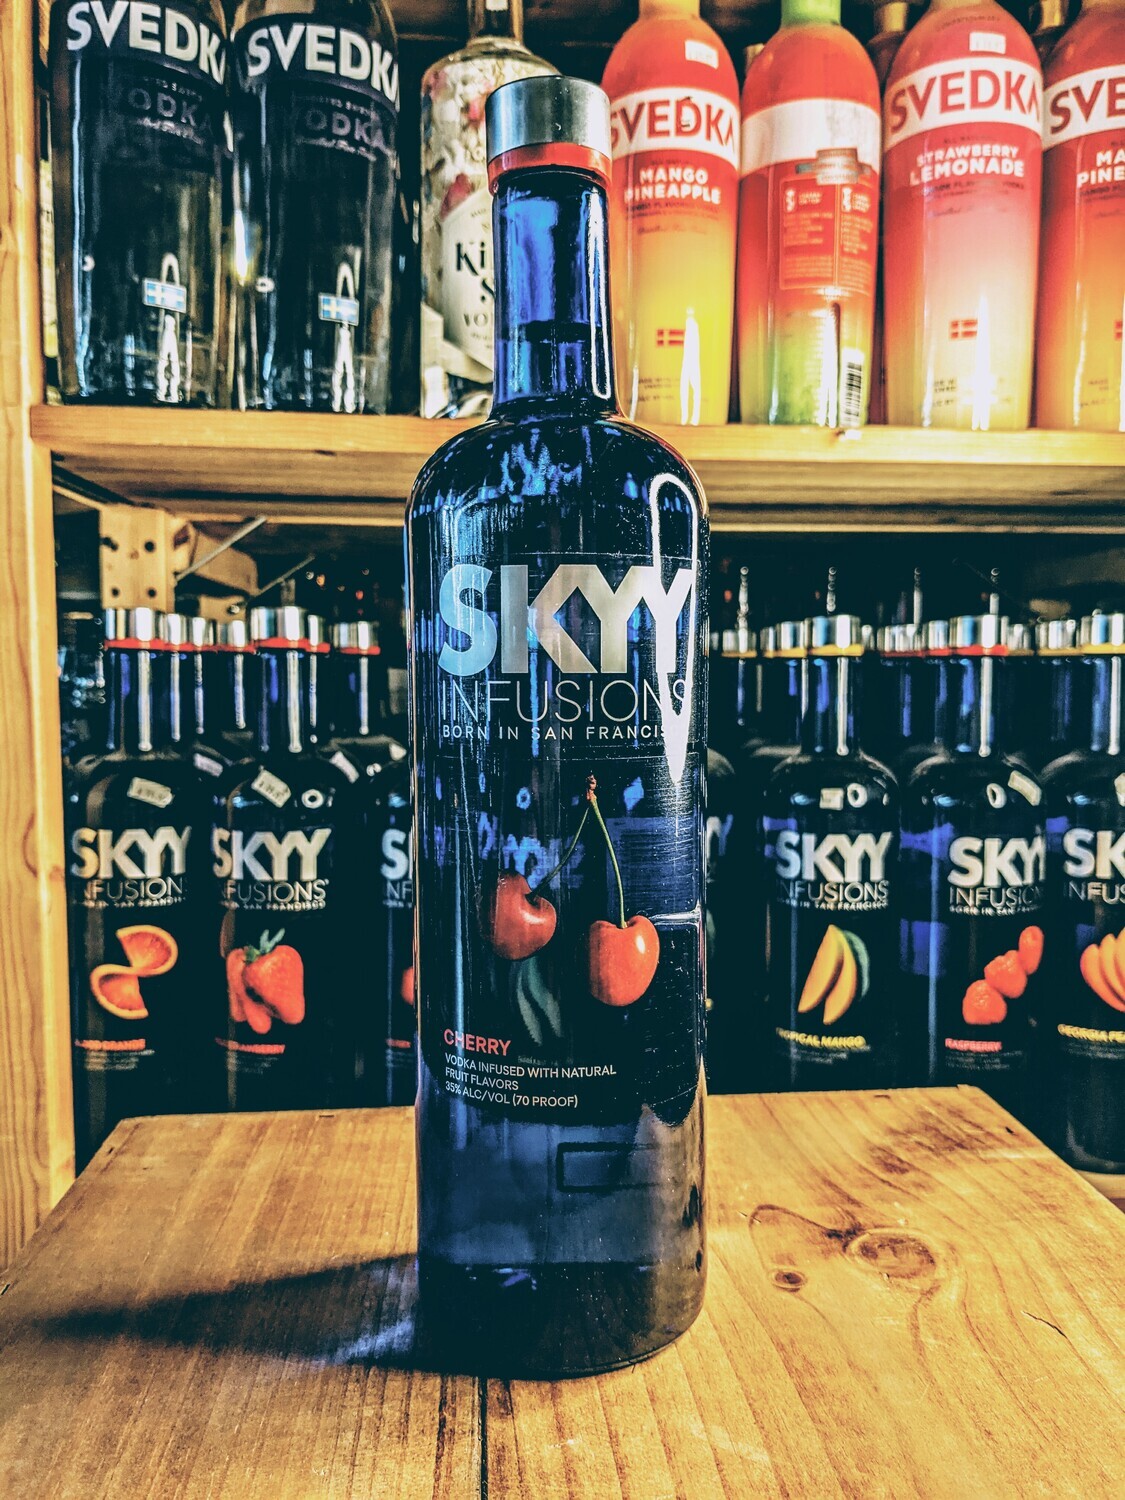 Skyy Infusions Cherry 1.0